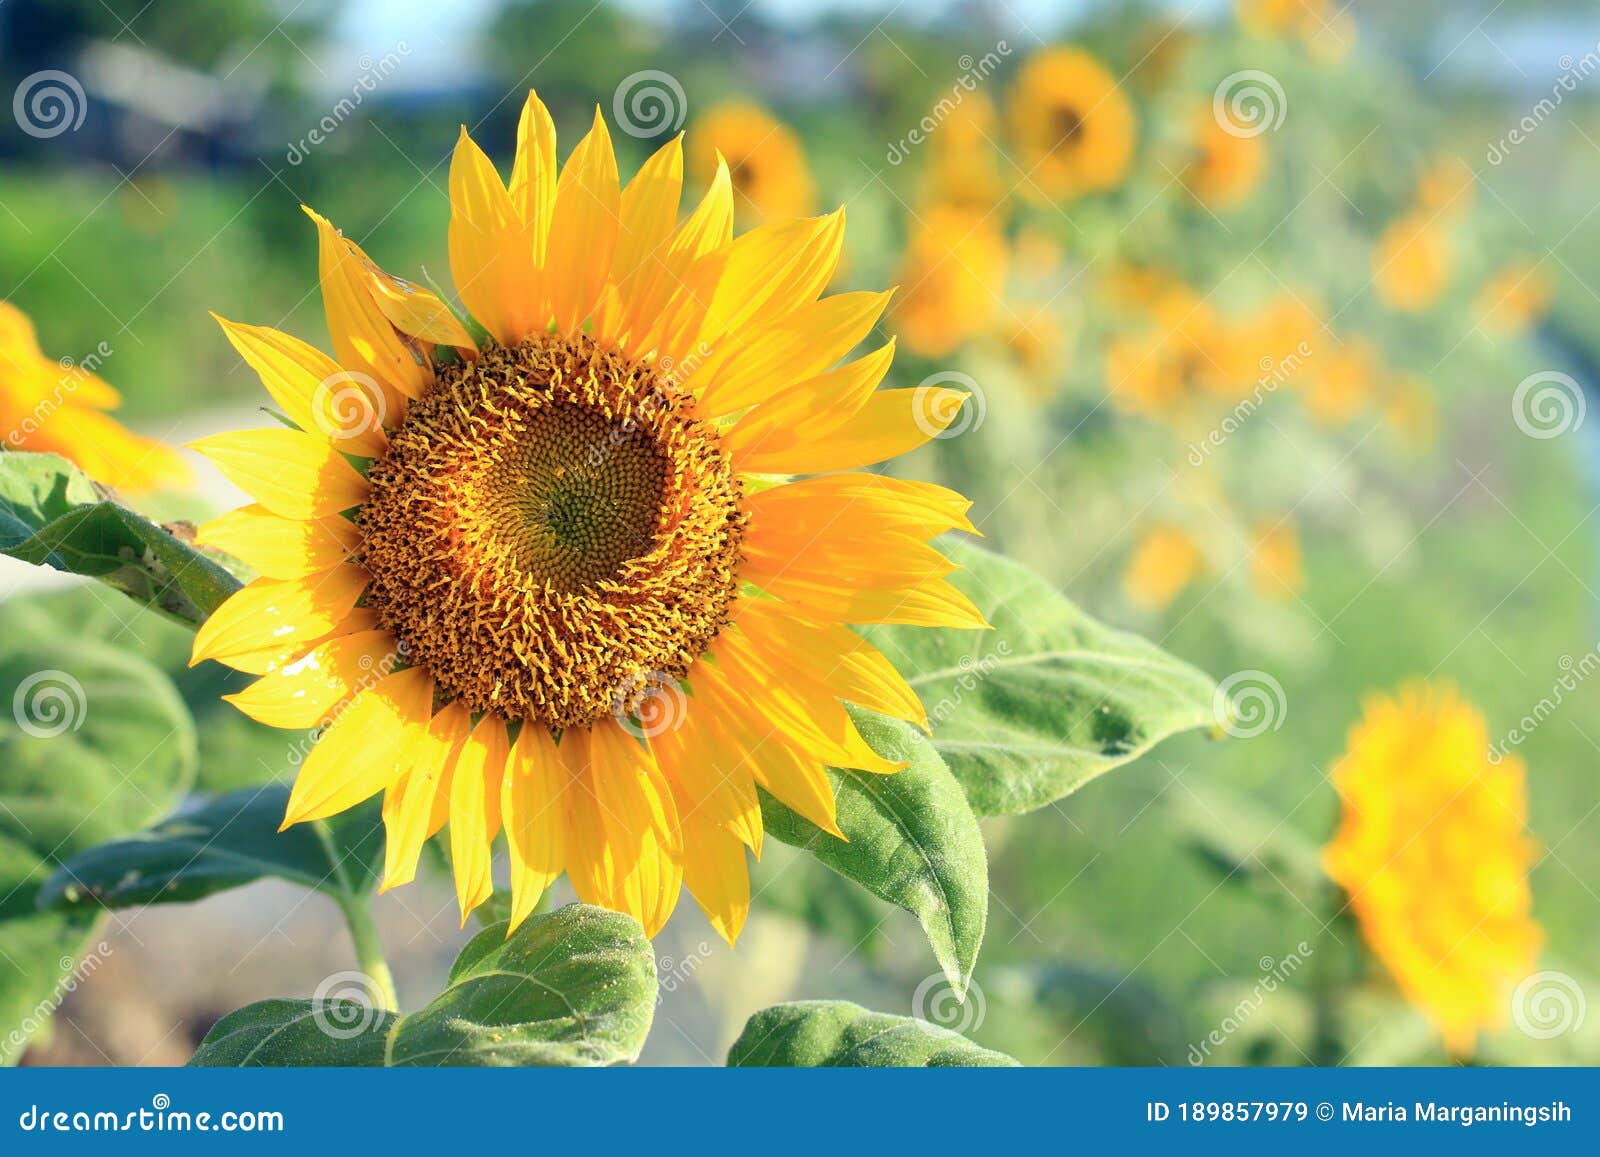 sunflower in the field. nature flowers background. natural floral pattern background. yellow flower blossom on spring or summer.